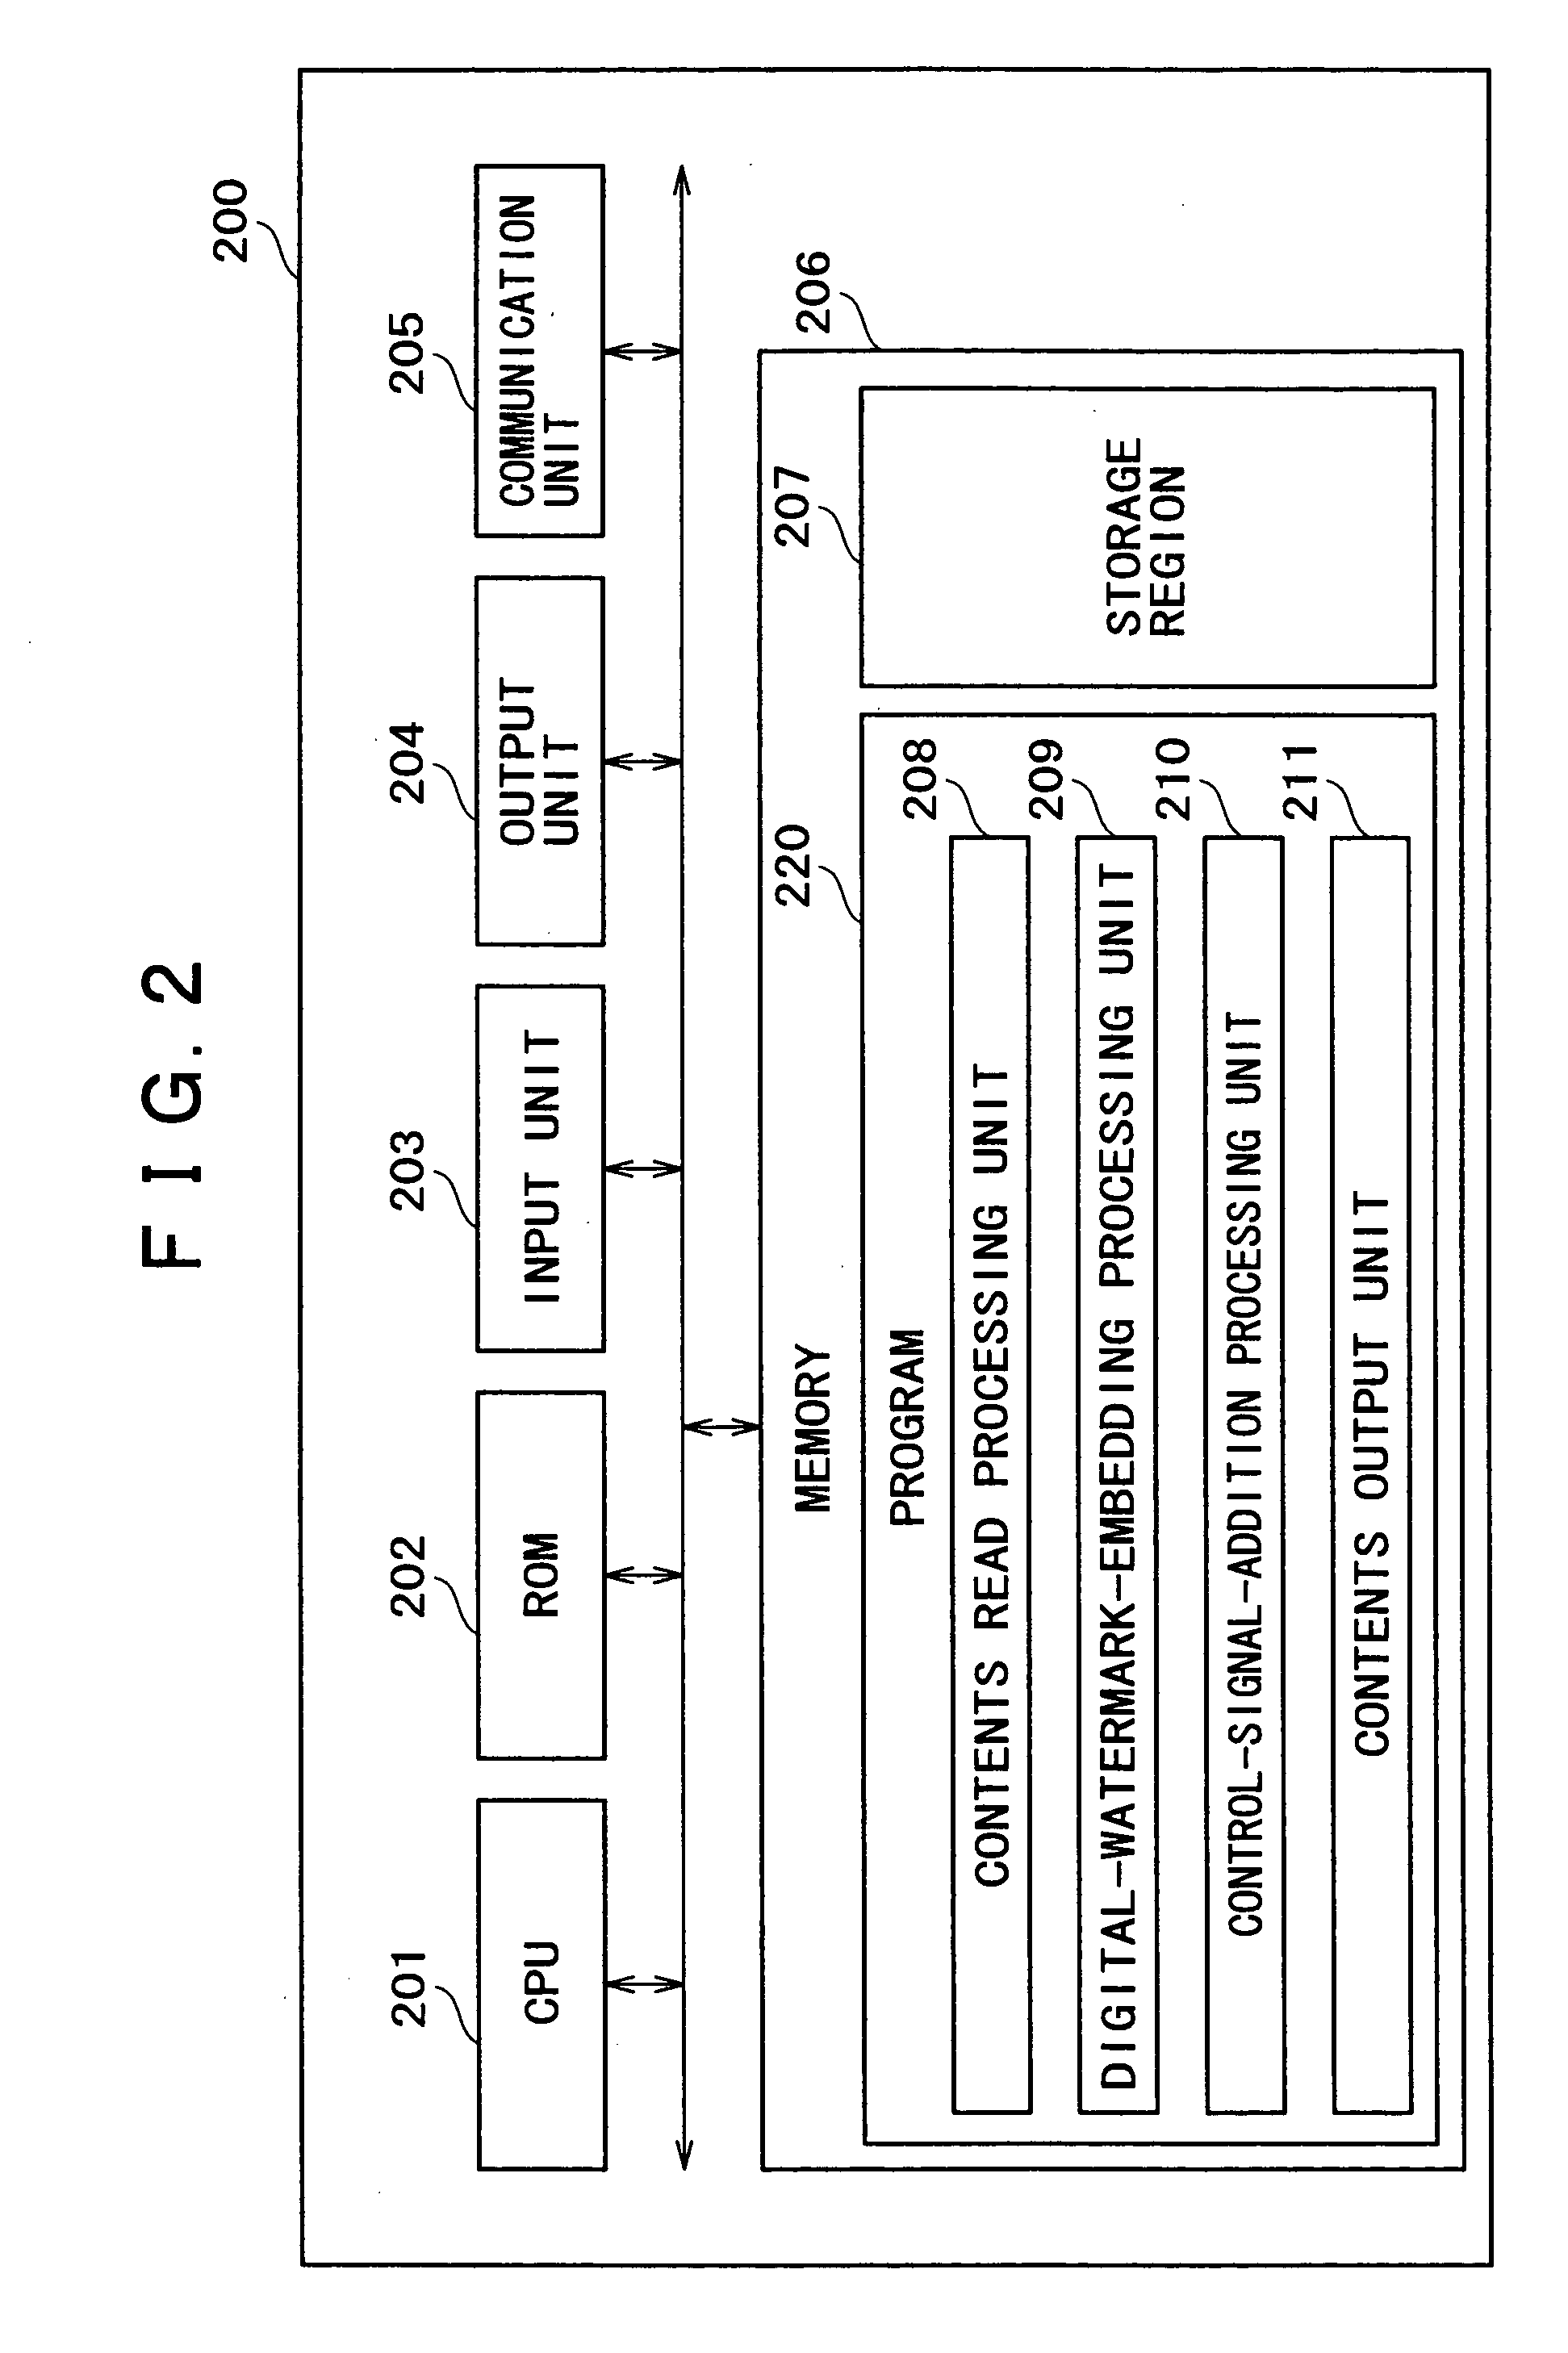 System and method for controlling contents by plurality of pieces of control information